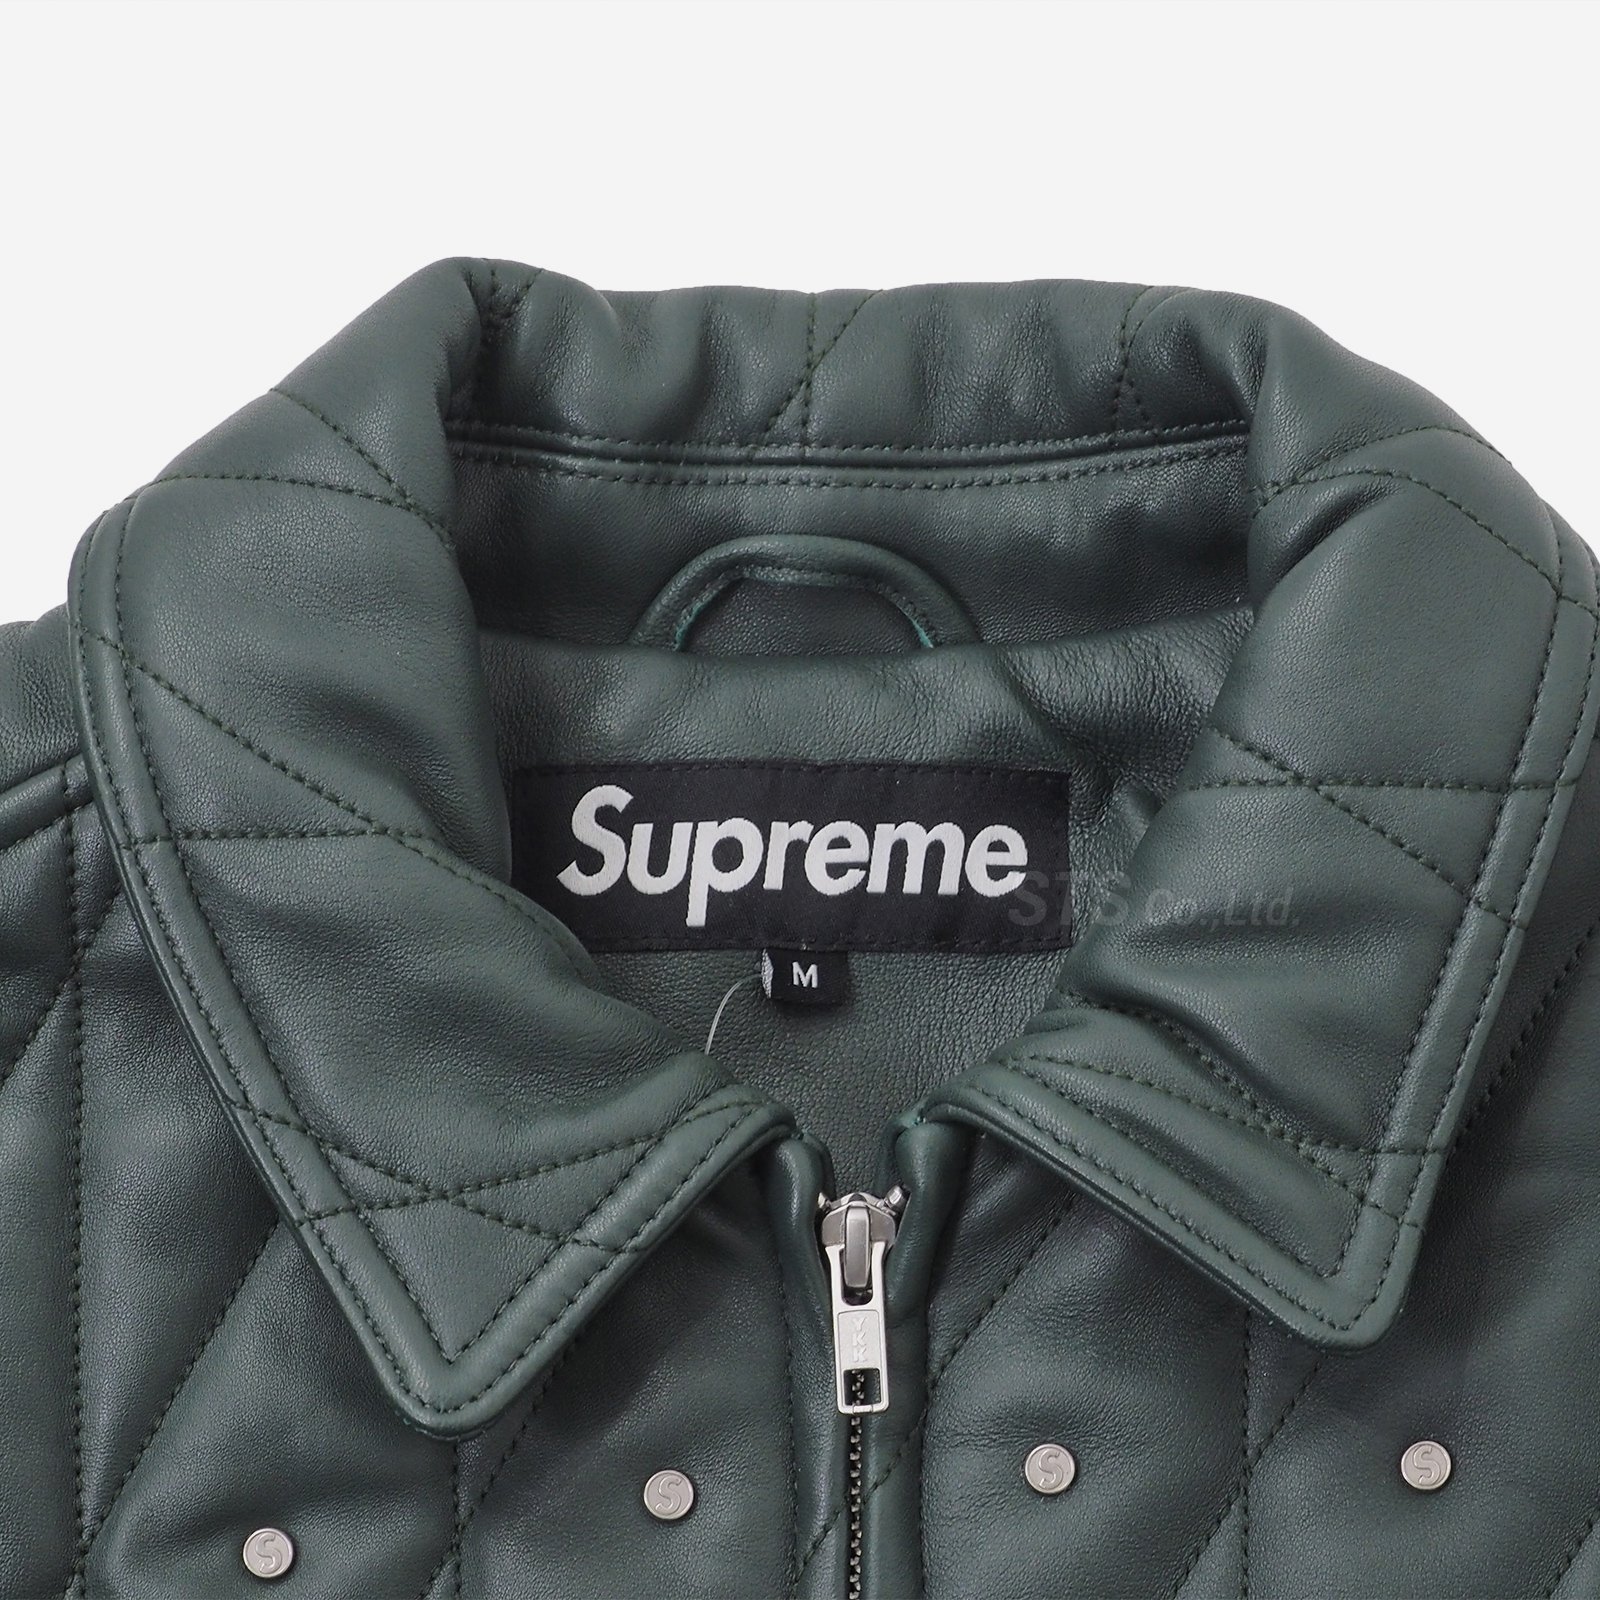 supreme quilted studded leather jacket M - ジャケット・アウター